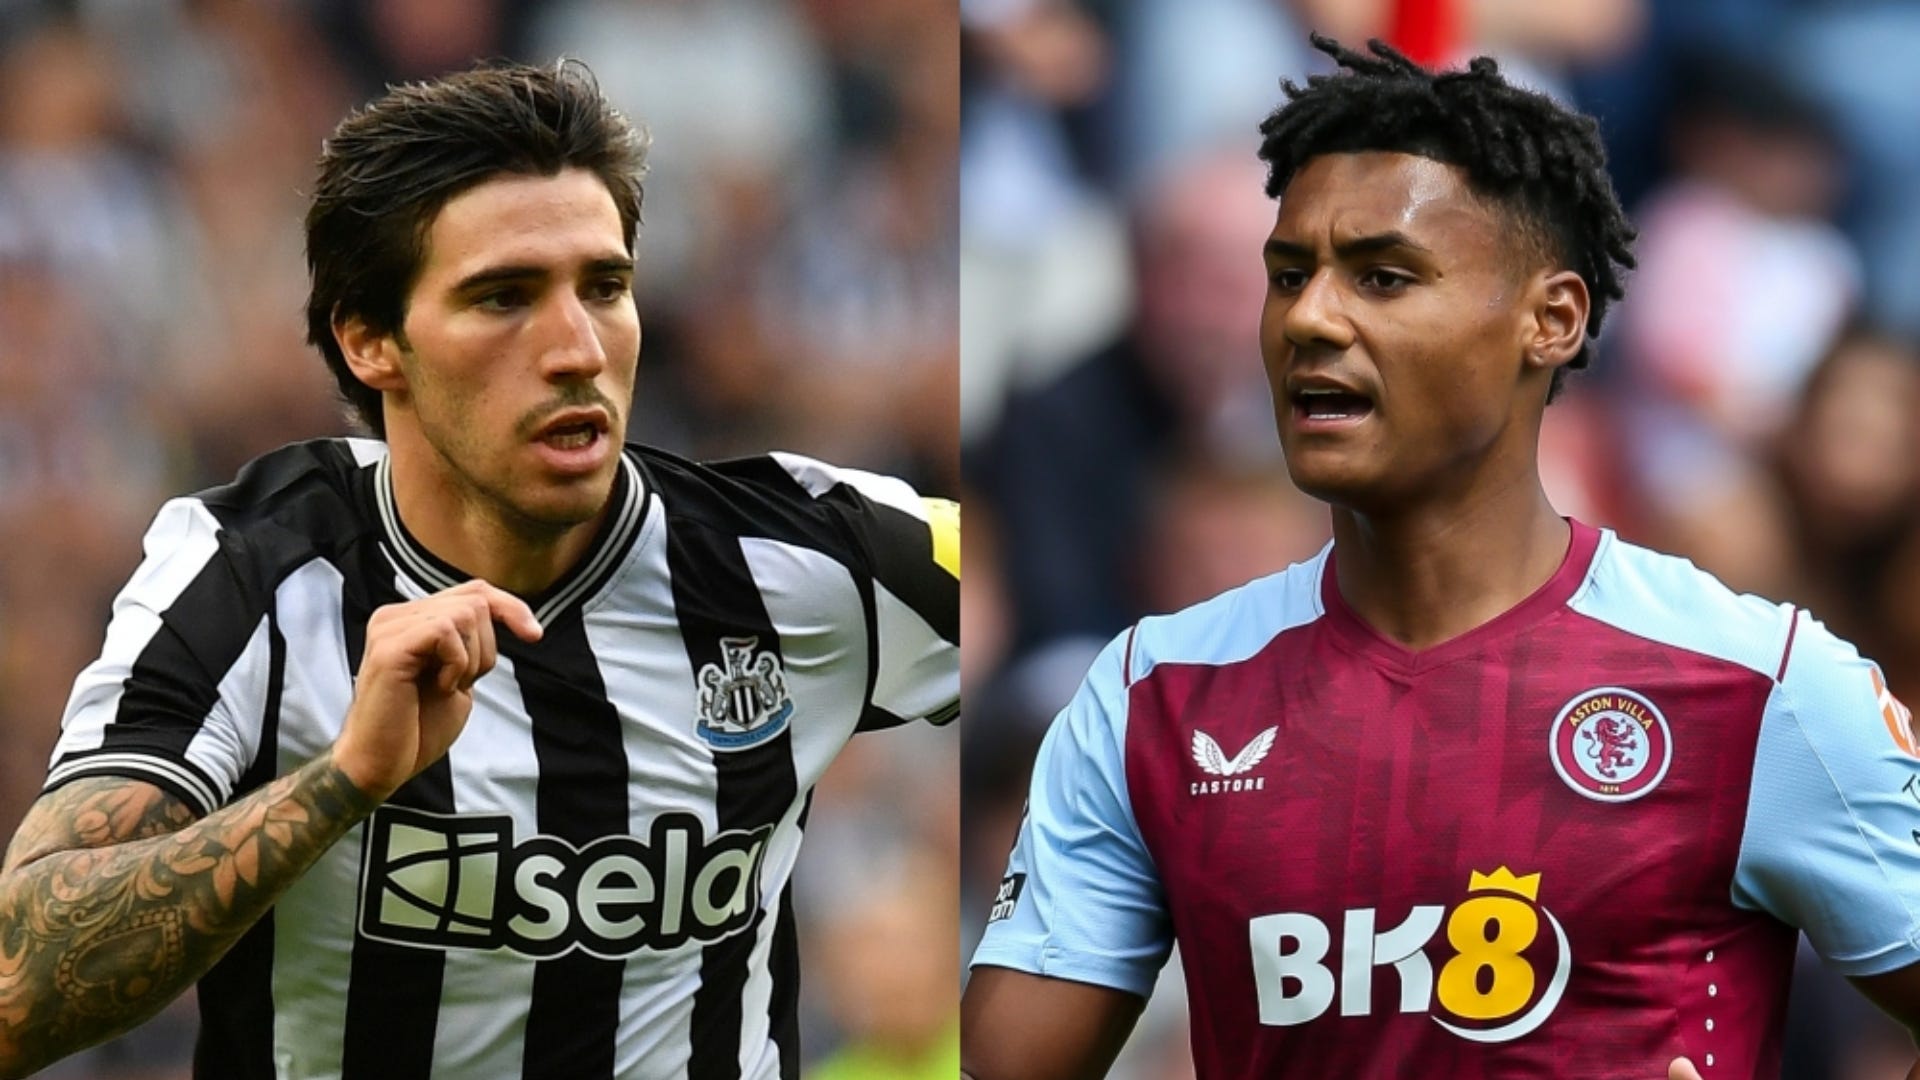 Newcastle United vs Aston Villa Live stream, TV channel, kick-off time and where to watch Goal US